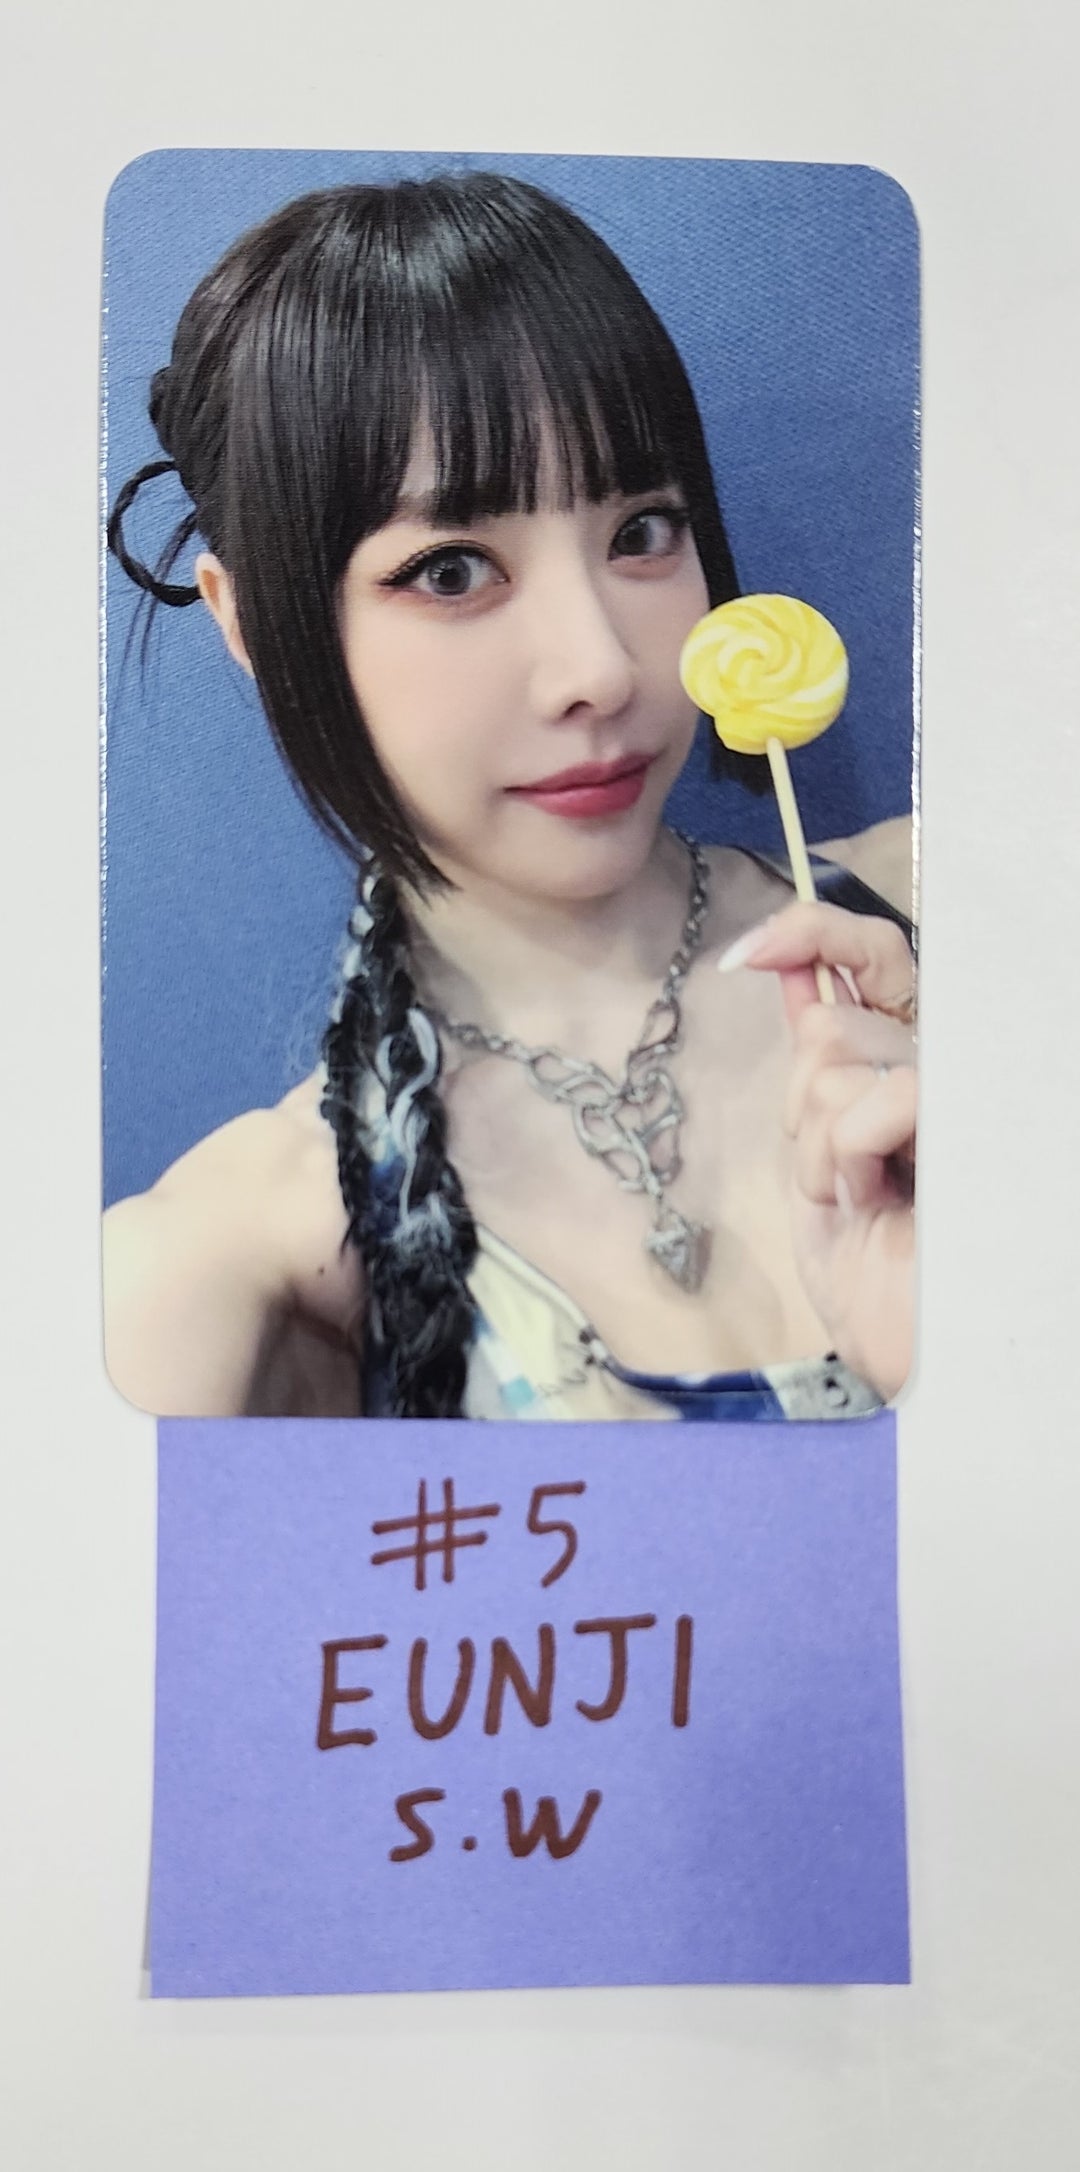 BBGIRLS "ONE MORE TIME" - Soundwave Fansign Event Photocard Round 2 [23.09.04]